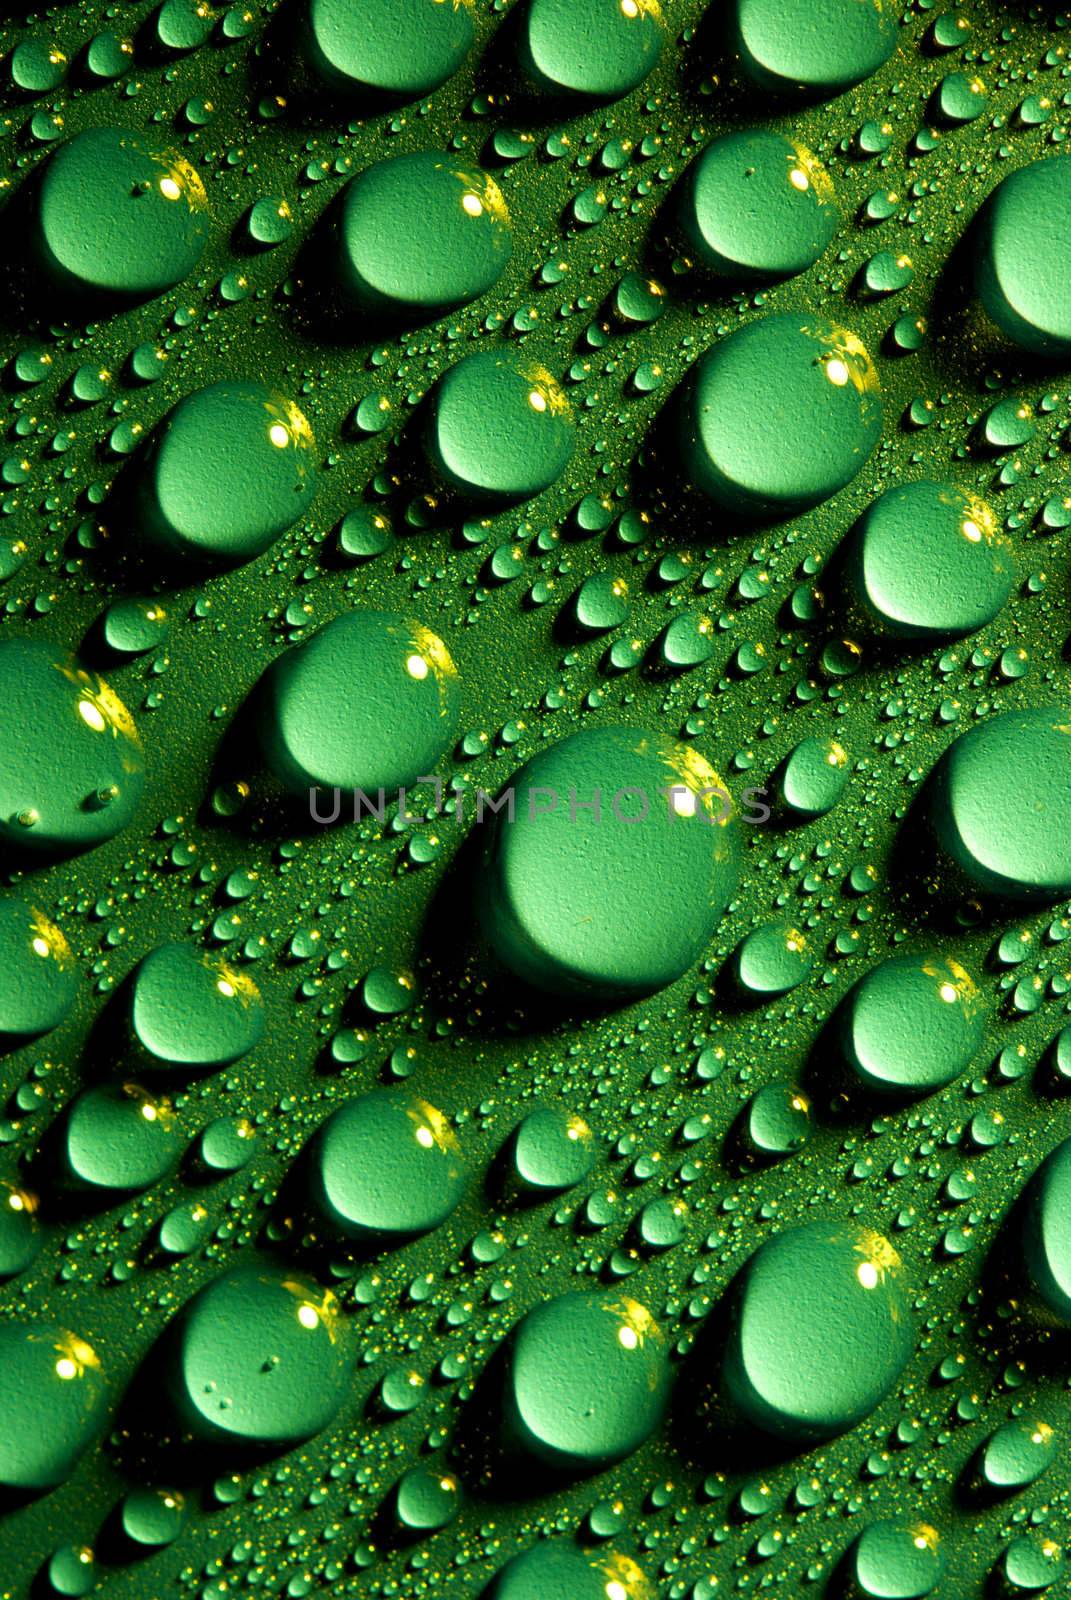 Crystal clear water drops over green background